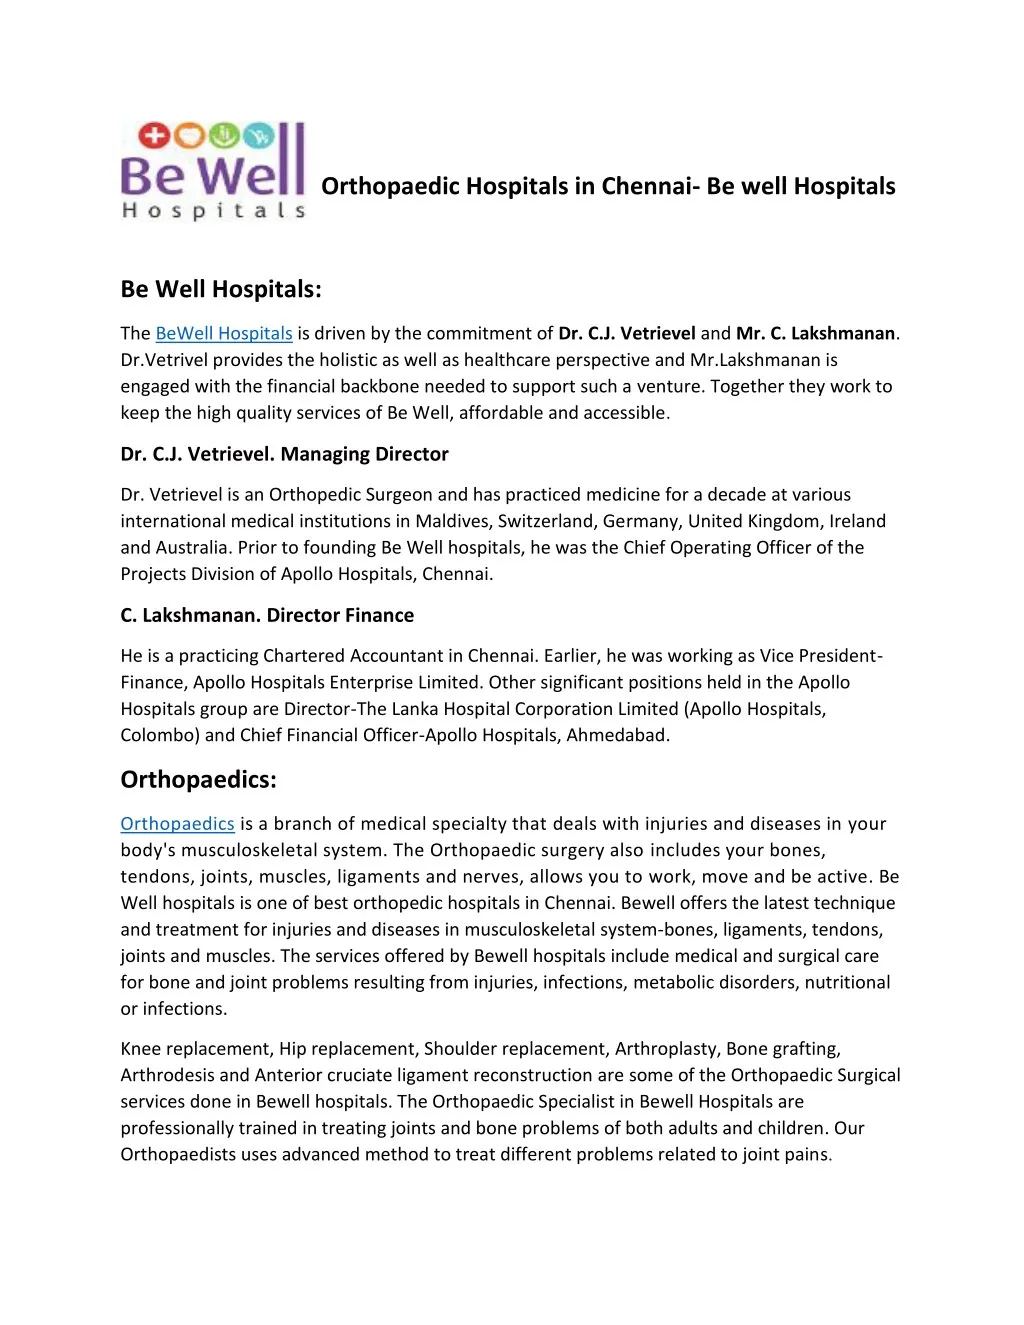 orthopaedic hospitals in chennai be well hospitals